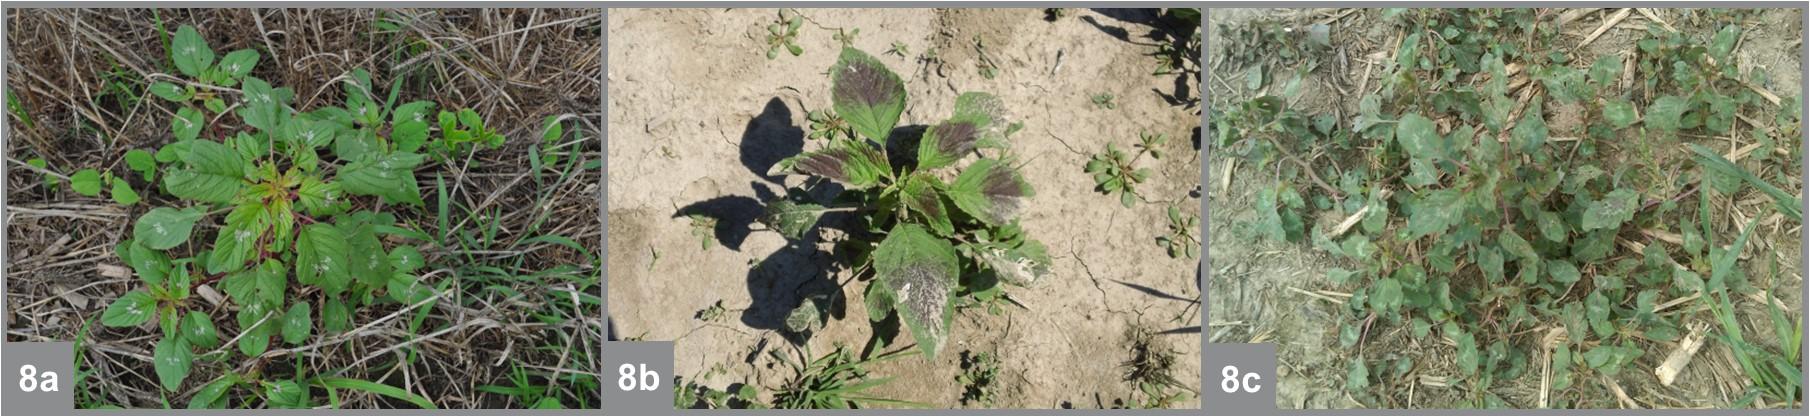 Watermarks on leaves of Palmer amaranth (a), redroot pigweed (b), and spiny amaranth (c).